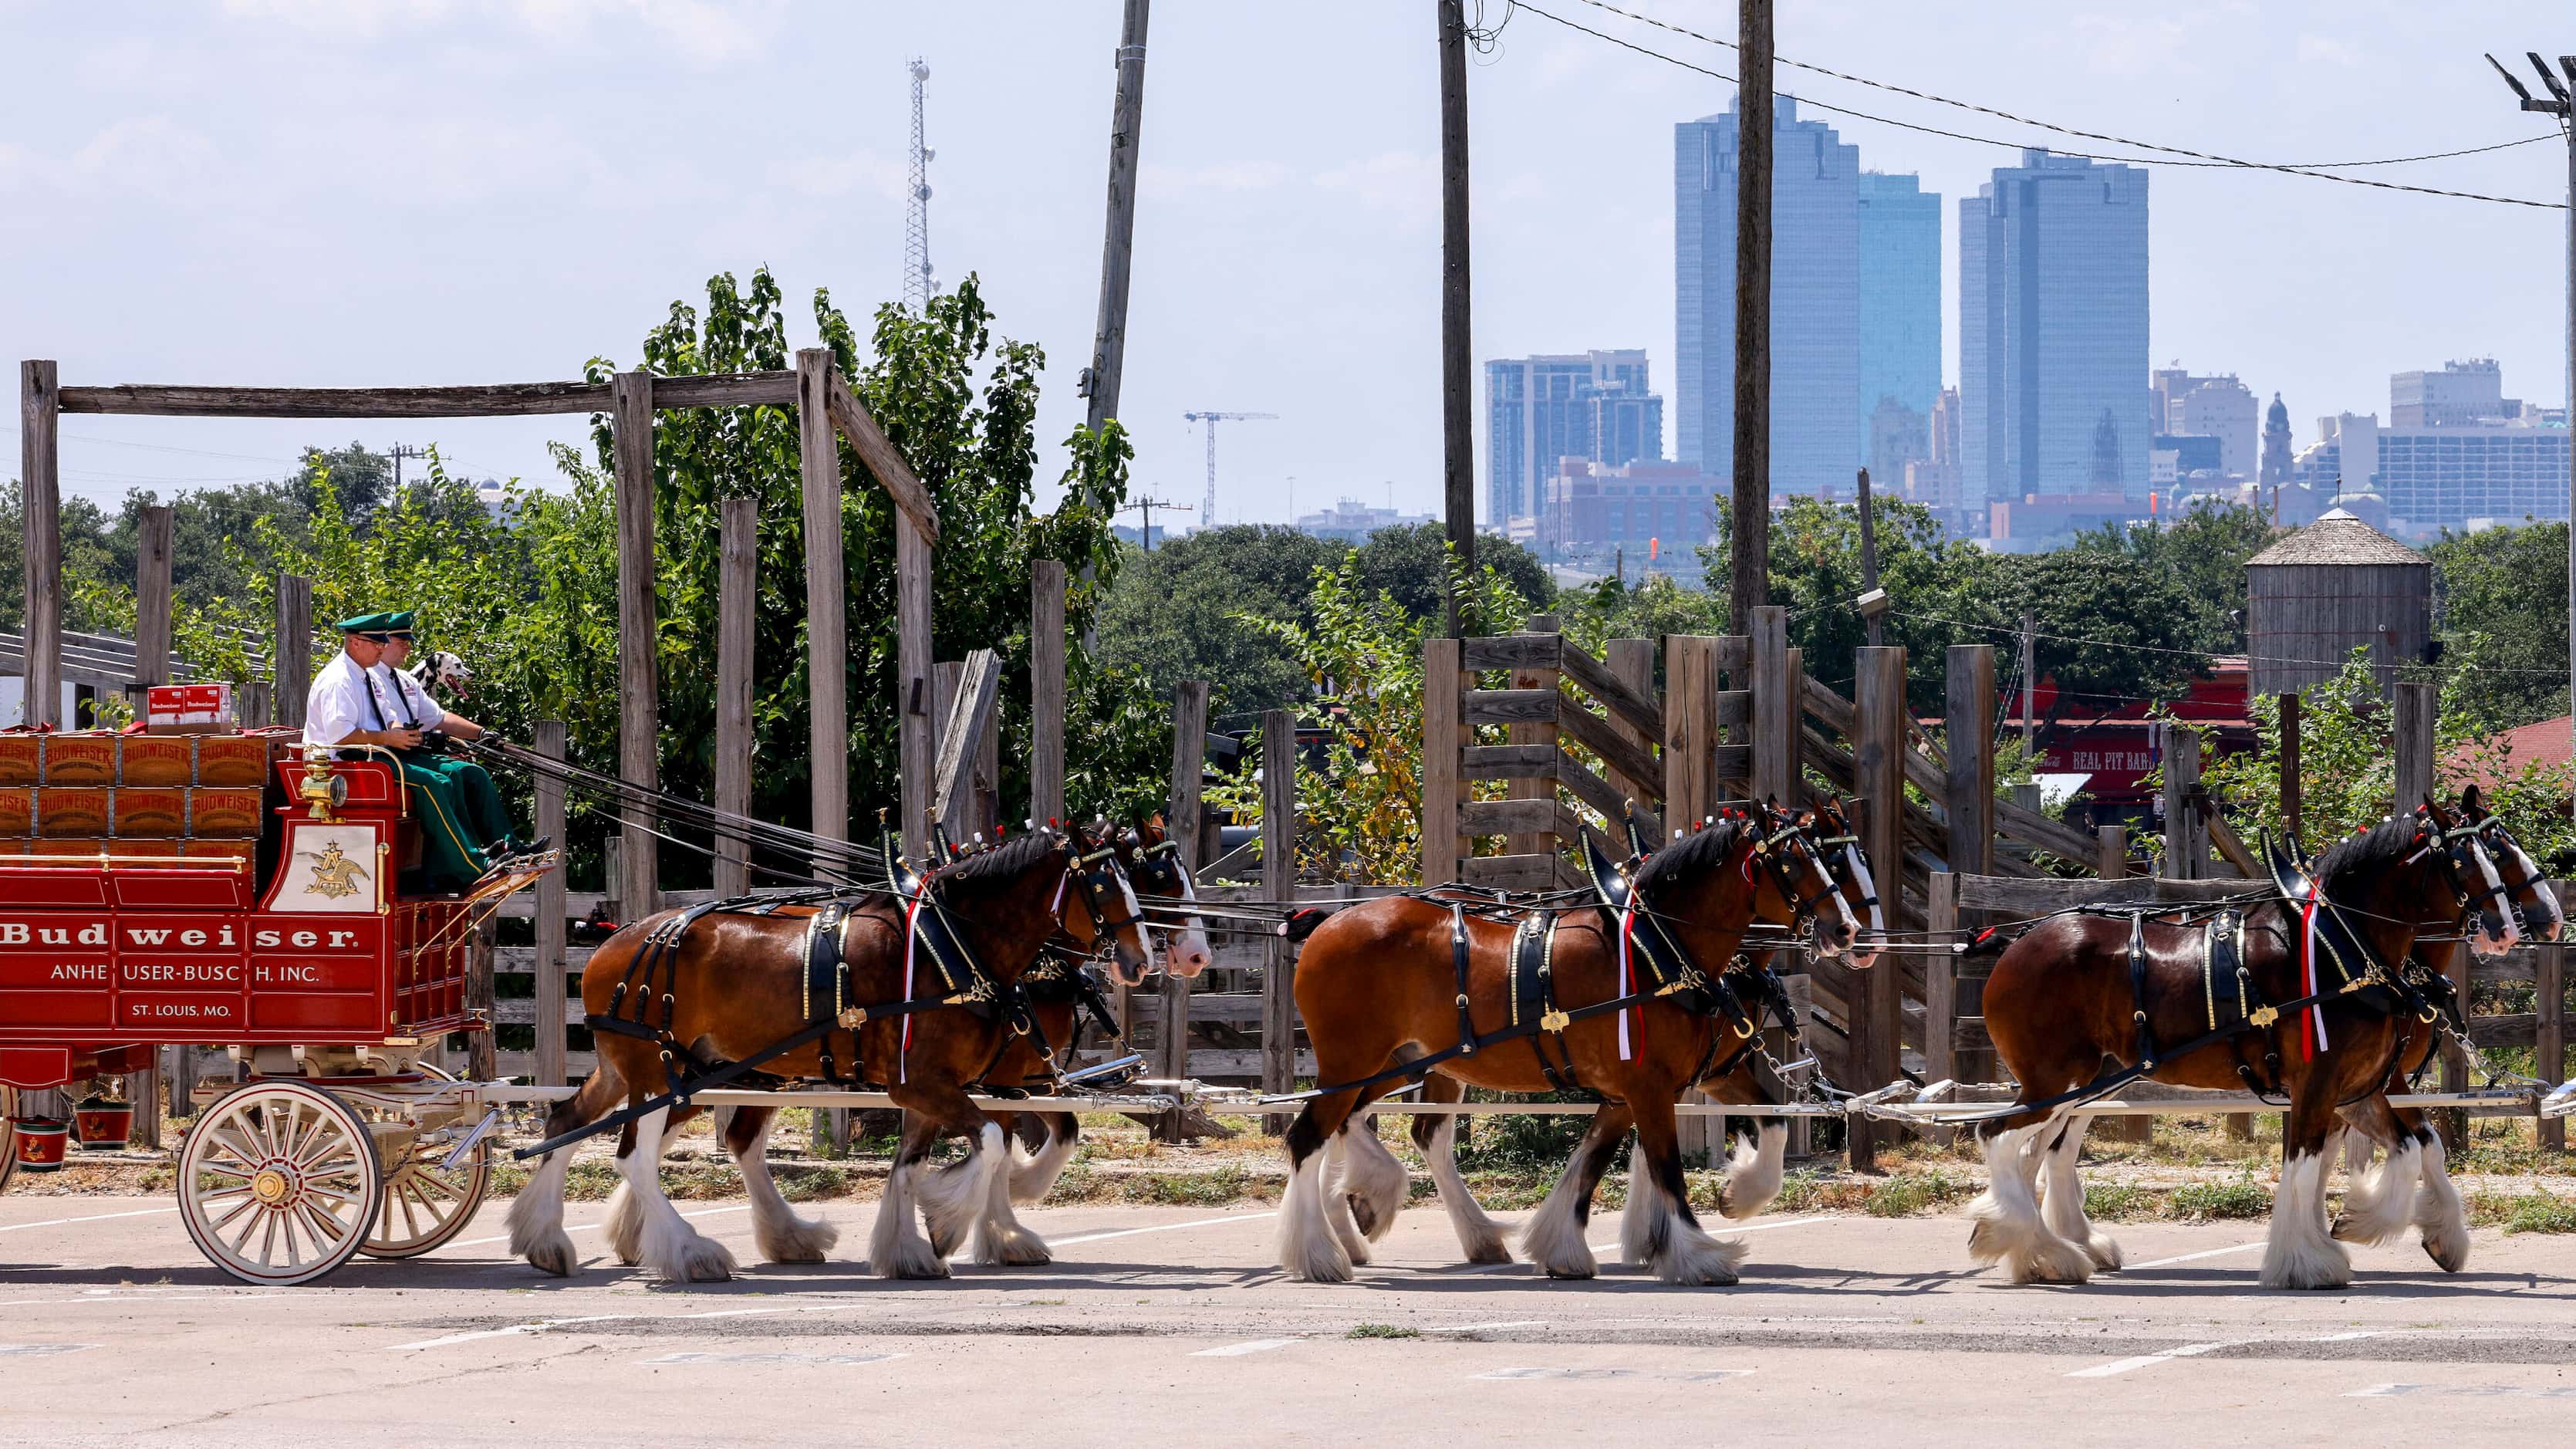 The Budweiser Clydesdales pull the Budweiser beer wagon around the Fort Worth Stockyards as...